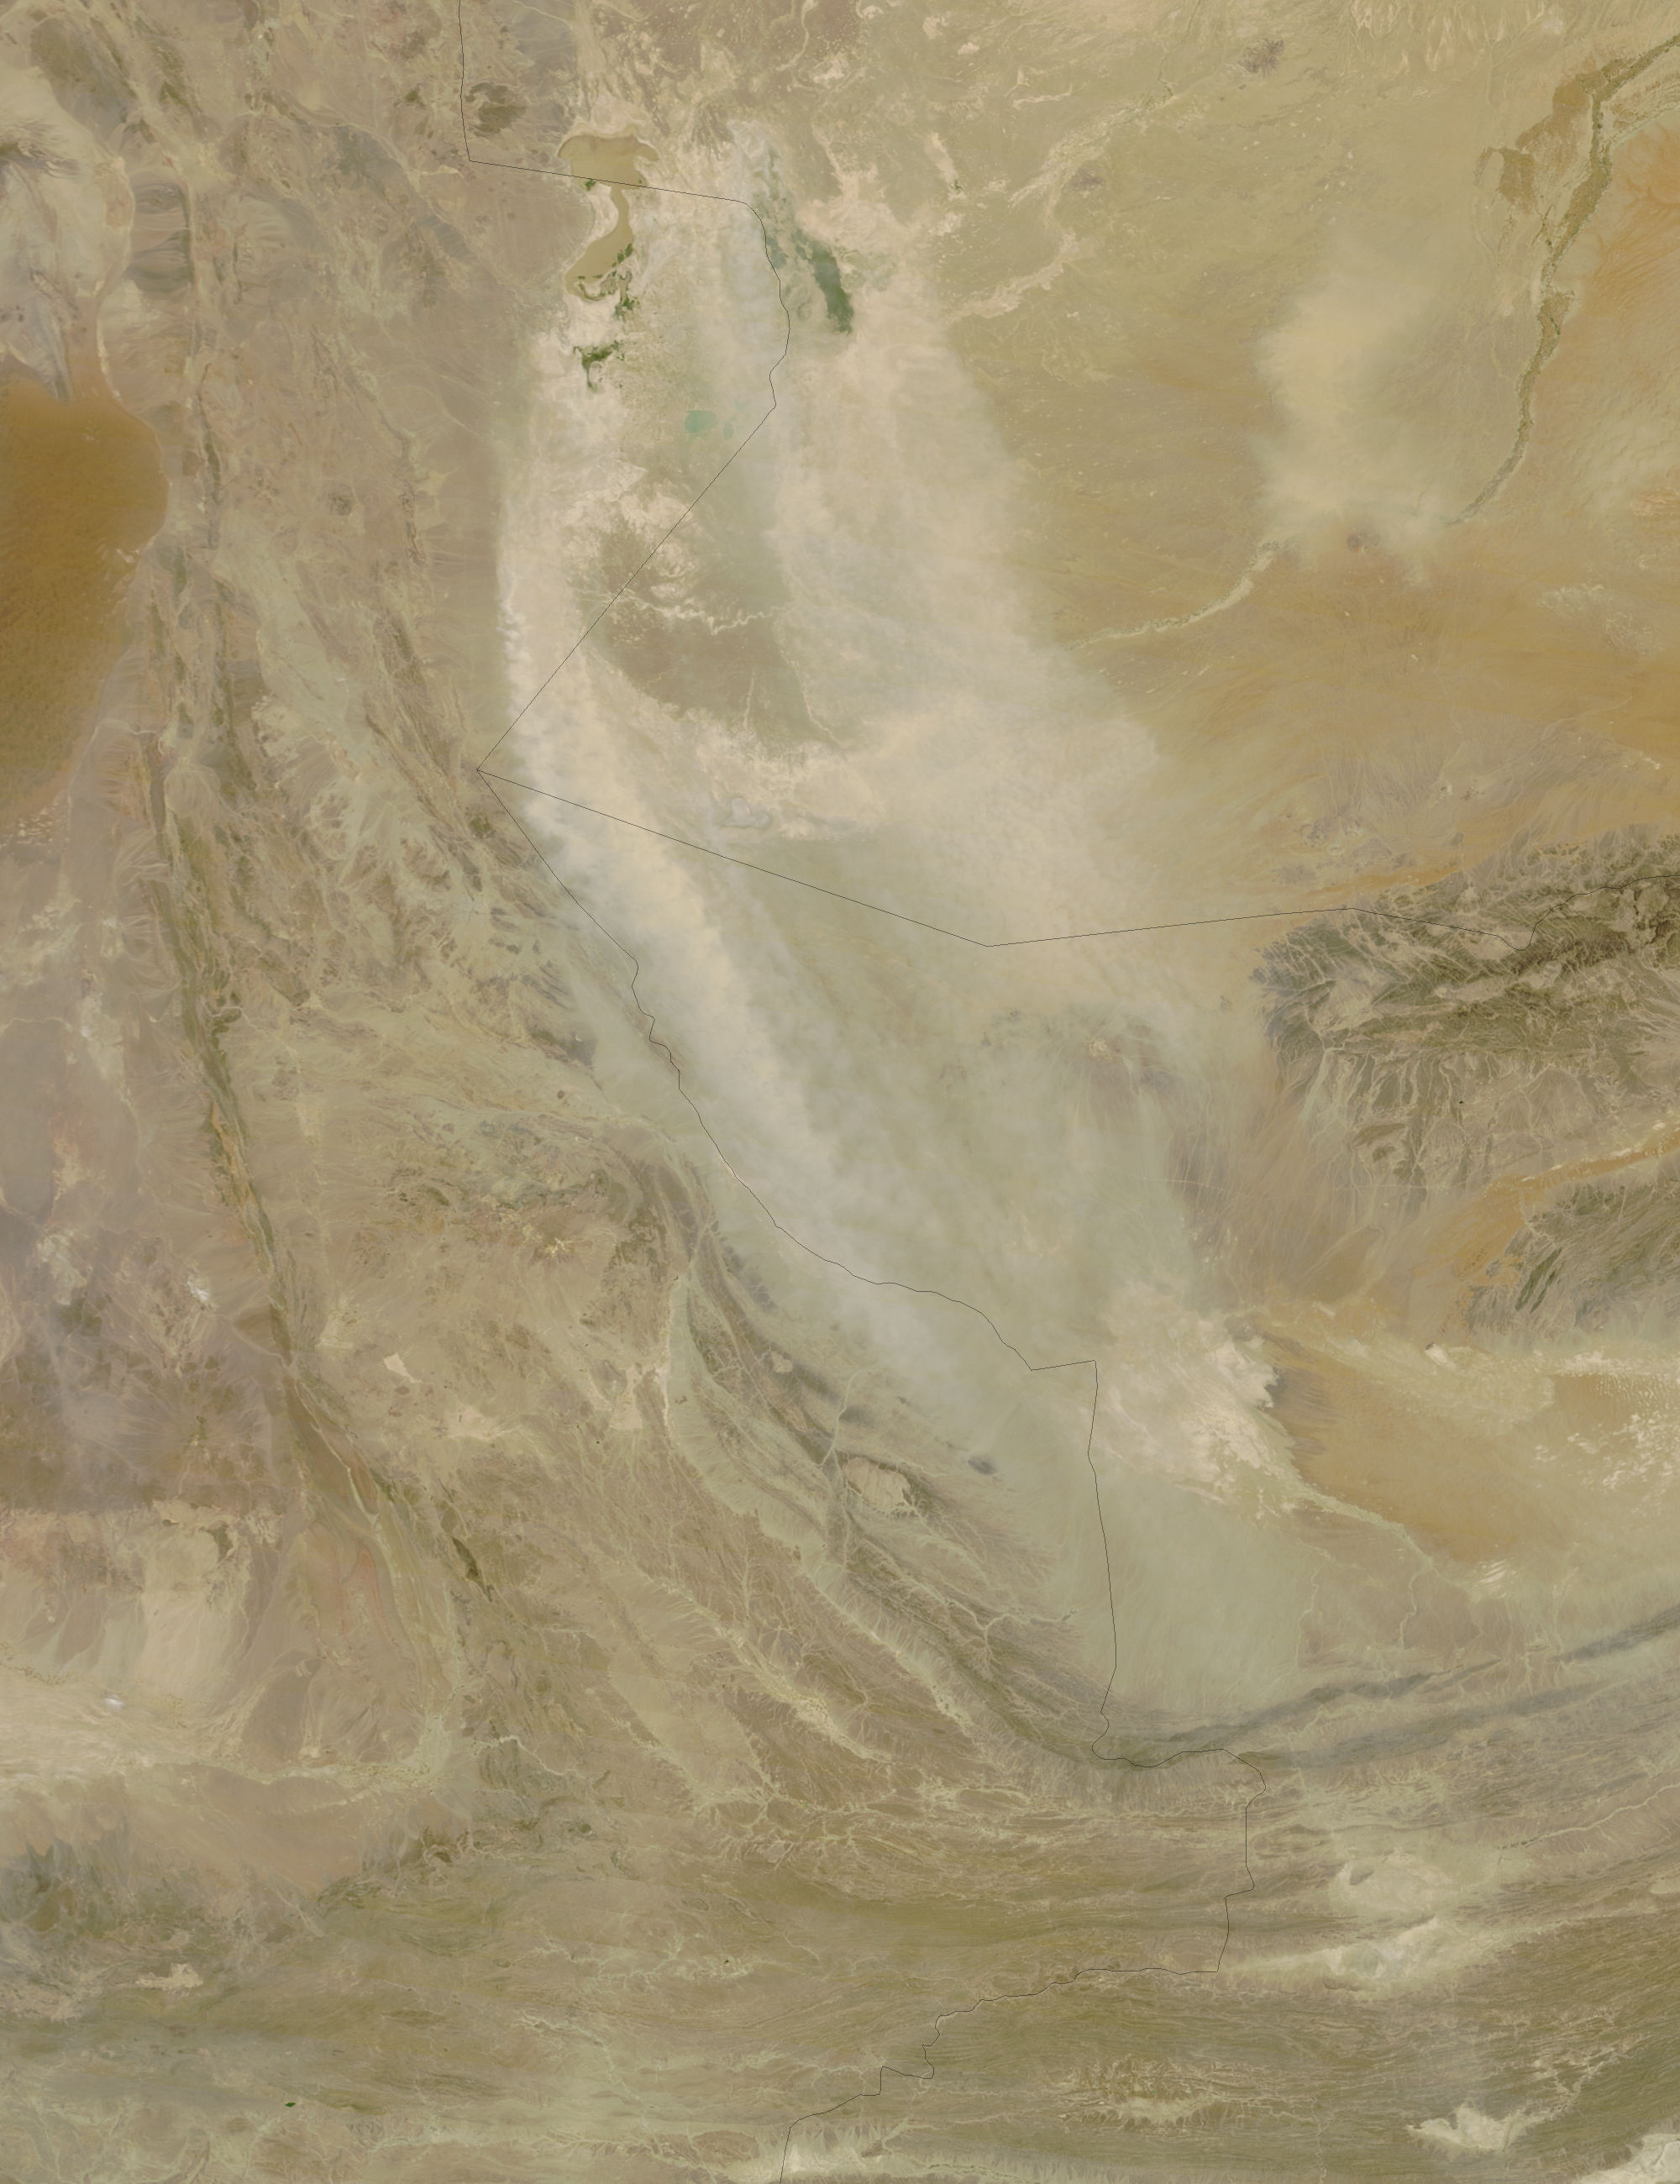 Dust over Iran, Afghanistan, and Pakistan - related image preview